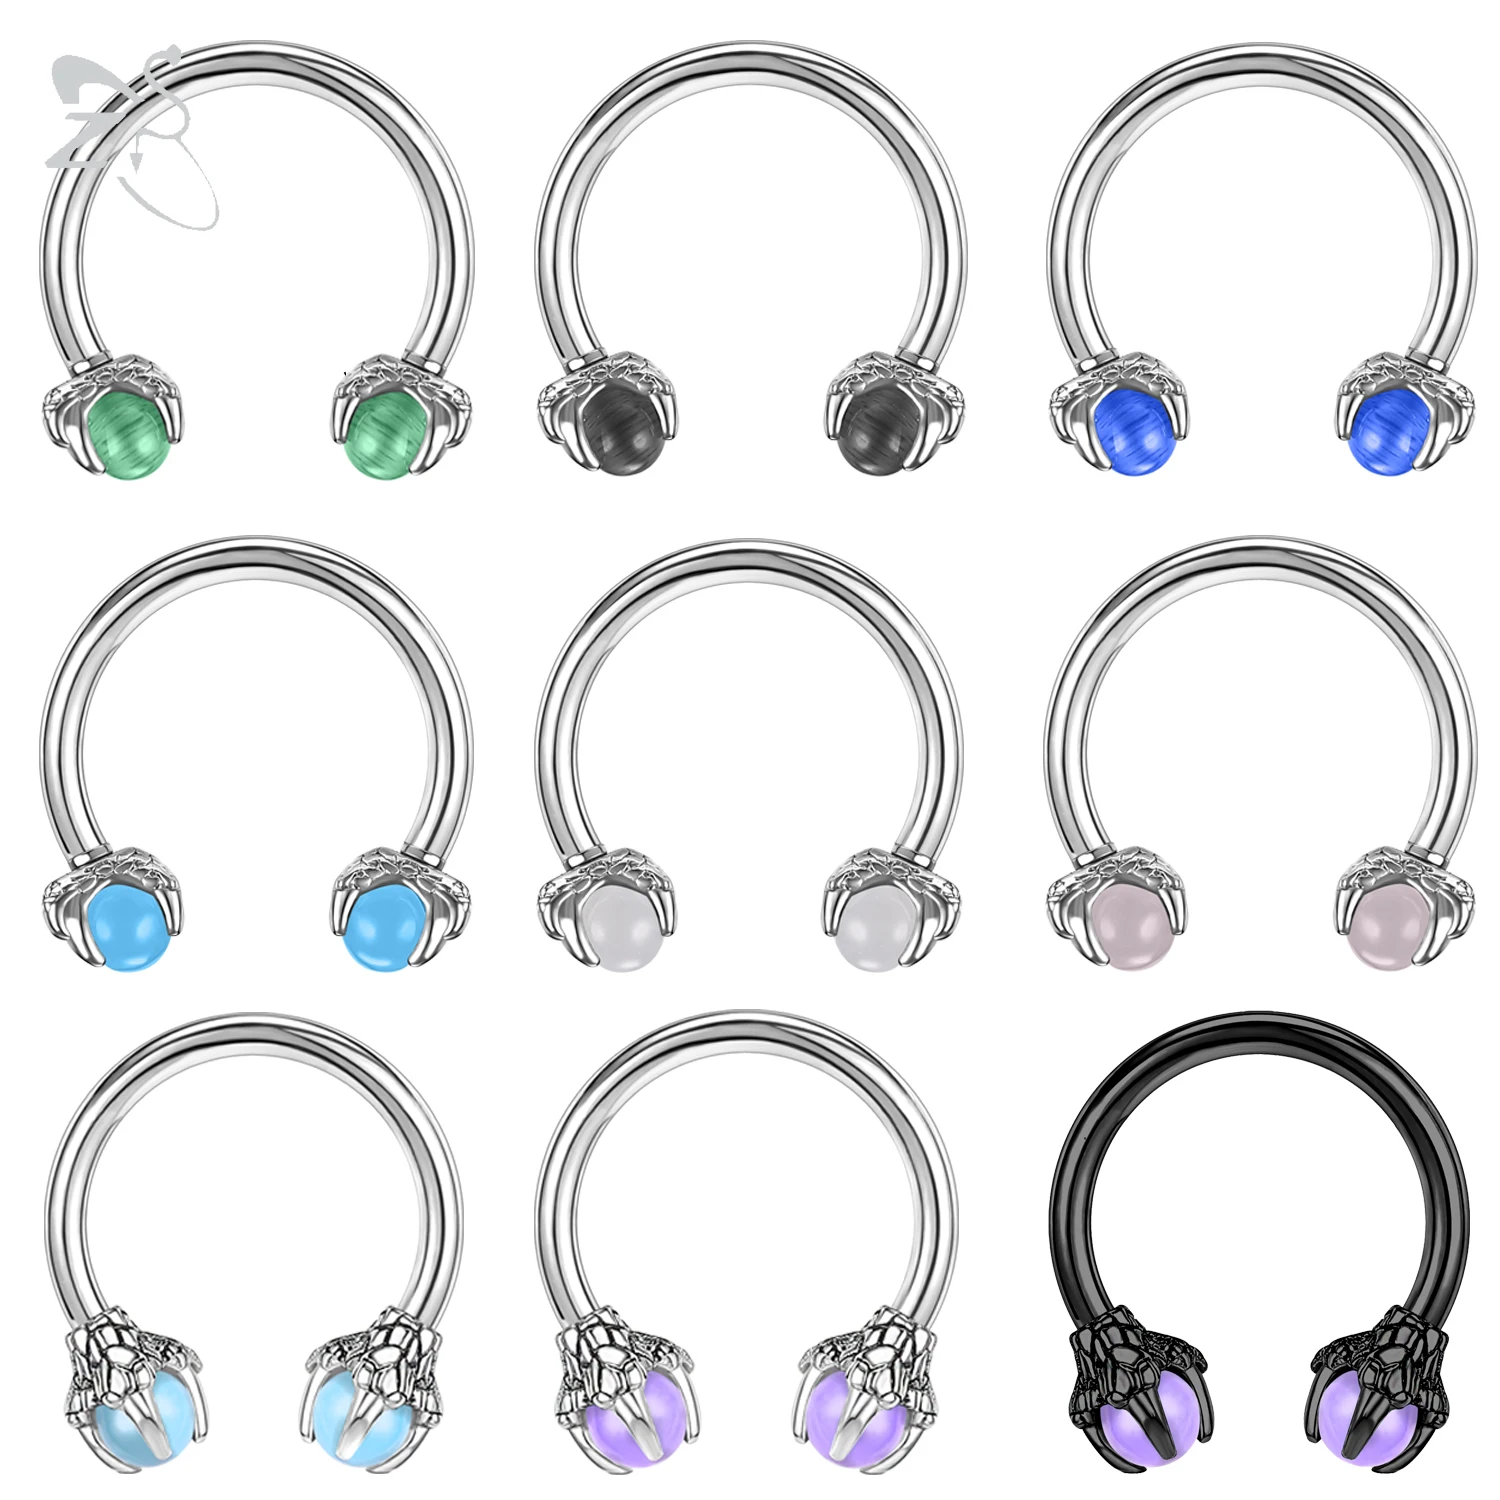 

ZS 1PC 316L Stainless Steel Nose Ring Dragon Claw Lip Rings Silver Color Septum Ring Ear Tragus Helix Cartilage Piercings 16G